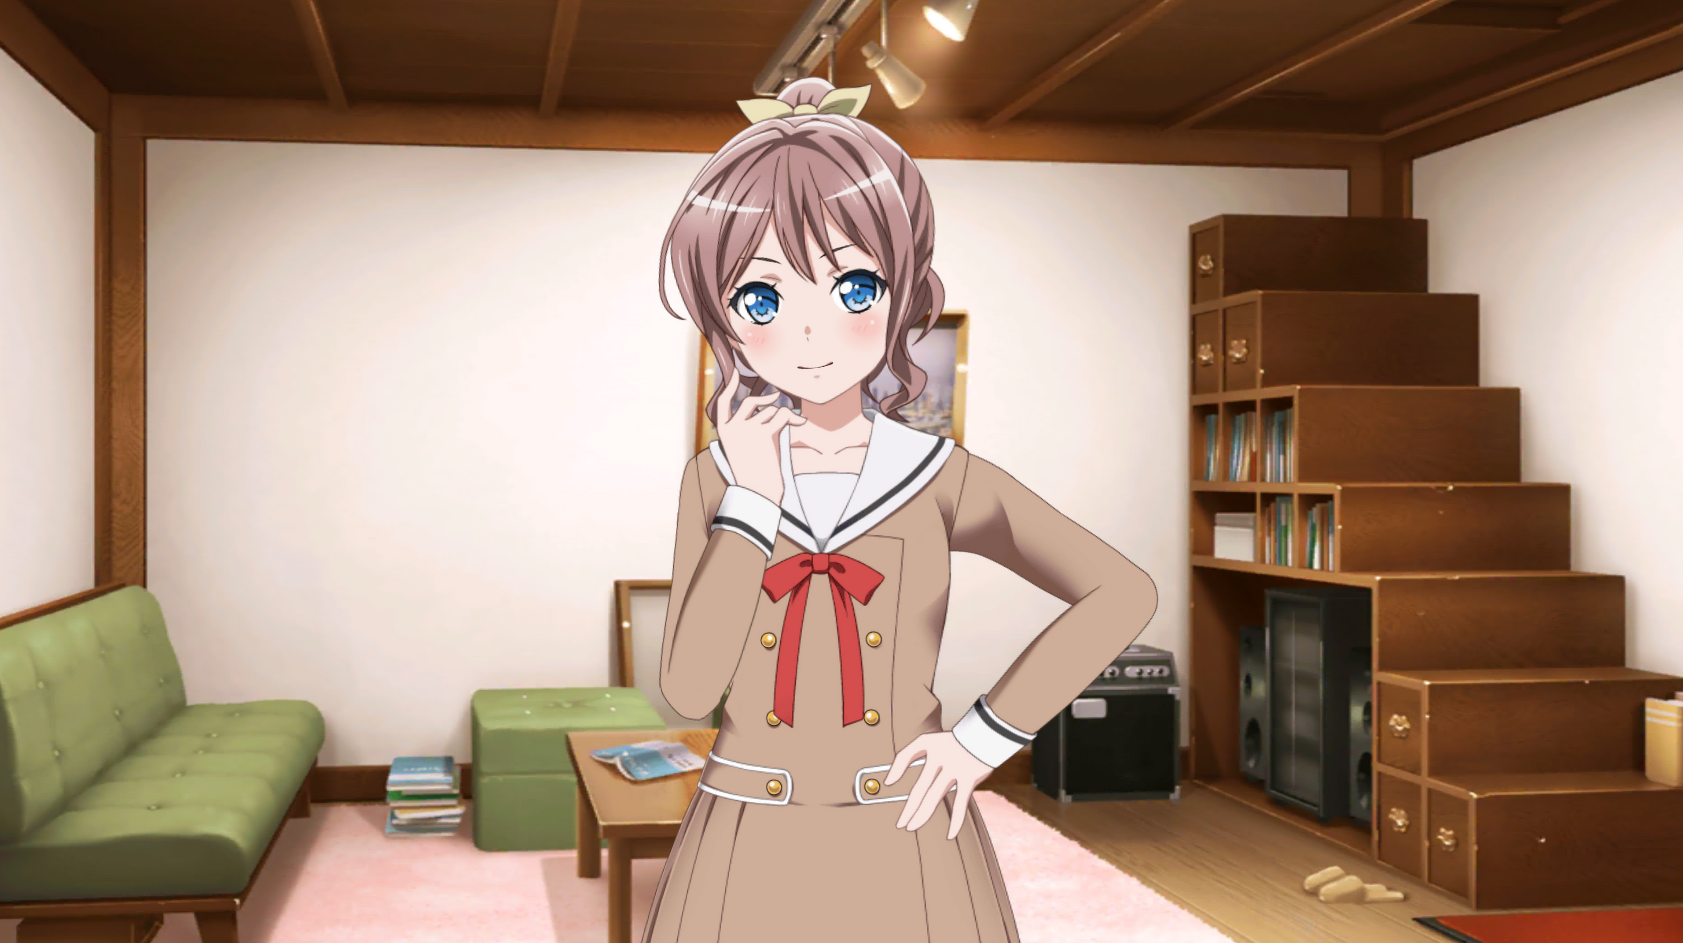 BanG Dream! Updates on X: Just a quick ad for our partners, we have a  subreddit over at /r/BanGDream, where you can share comments and links!    / X